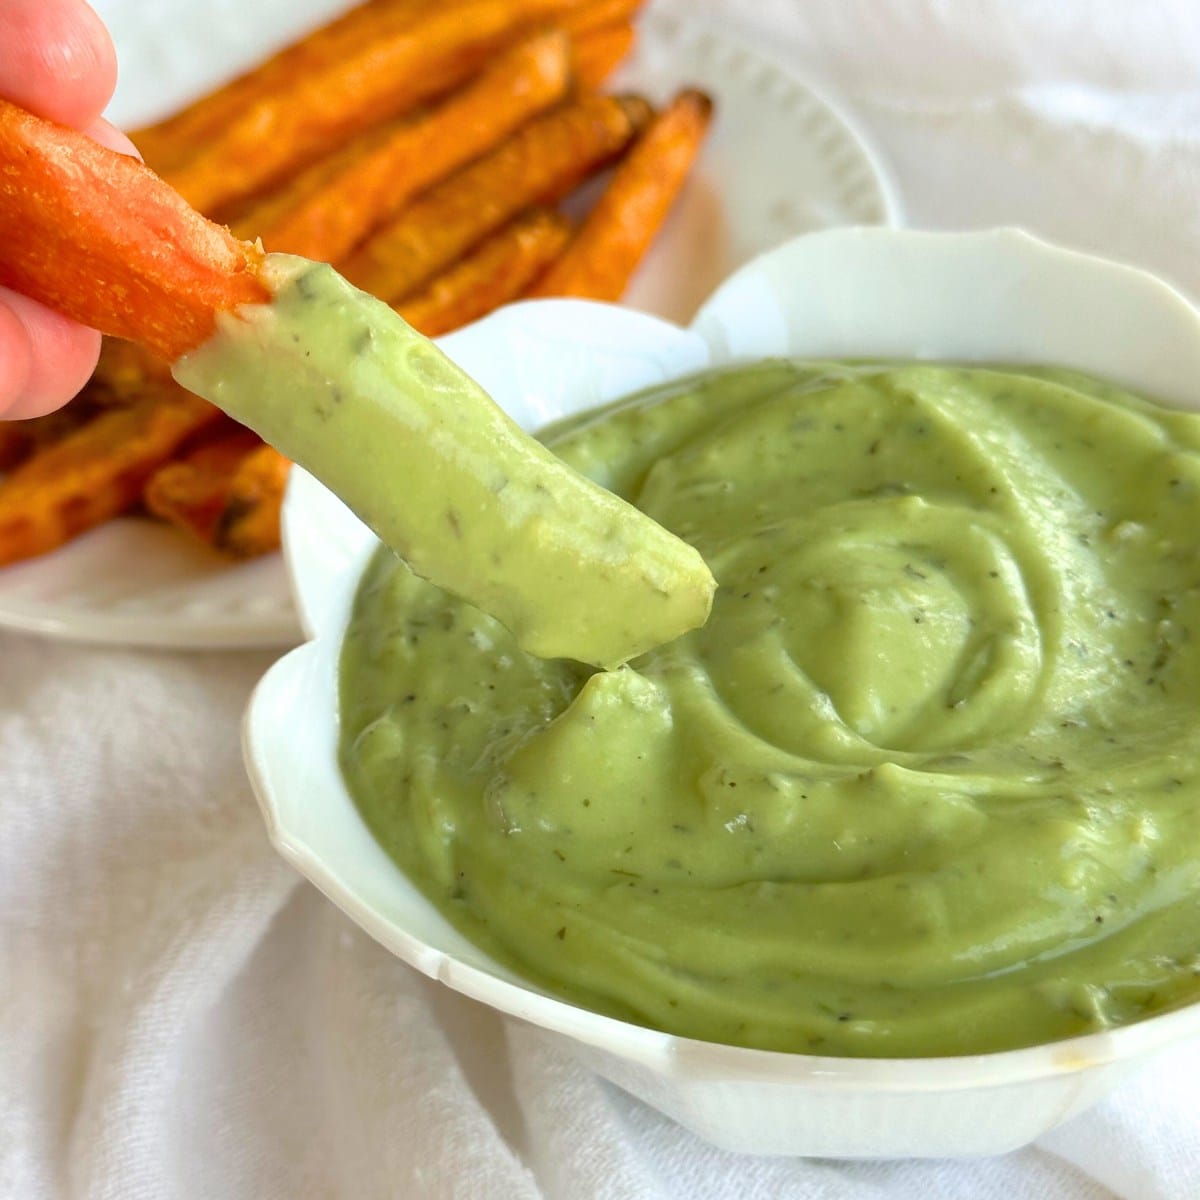 Sweet potato french fry dipped in vegan avocado ranch dip. background shows a plate of sweet potato fries.